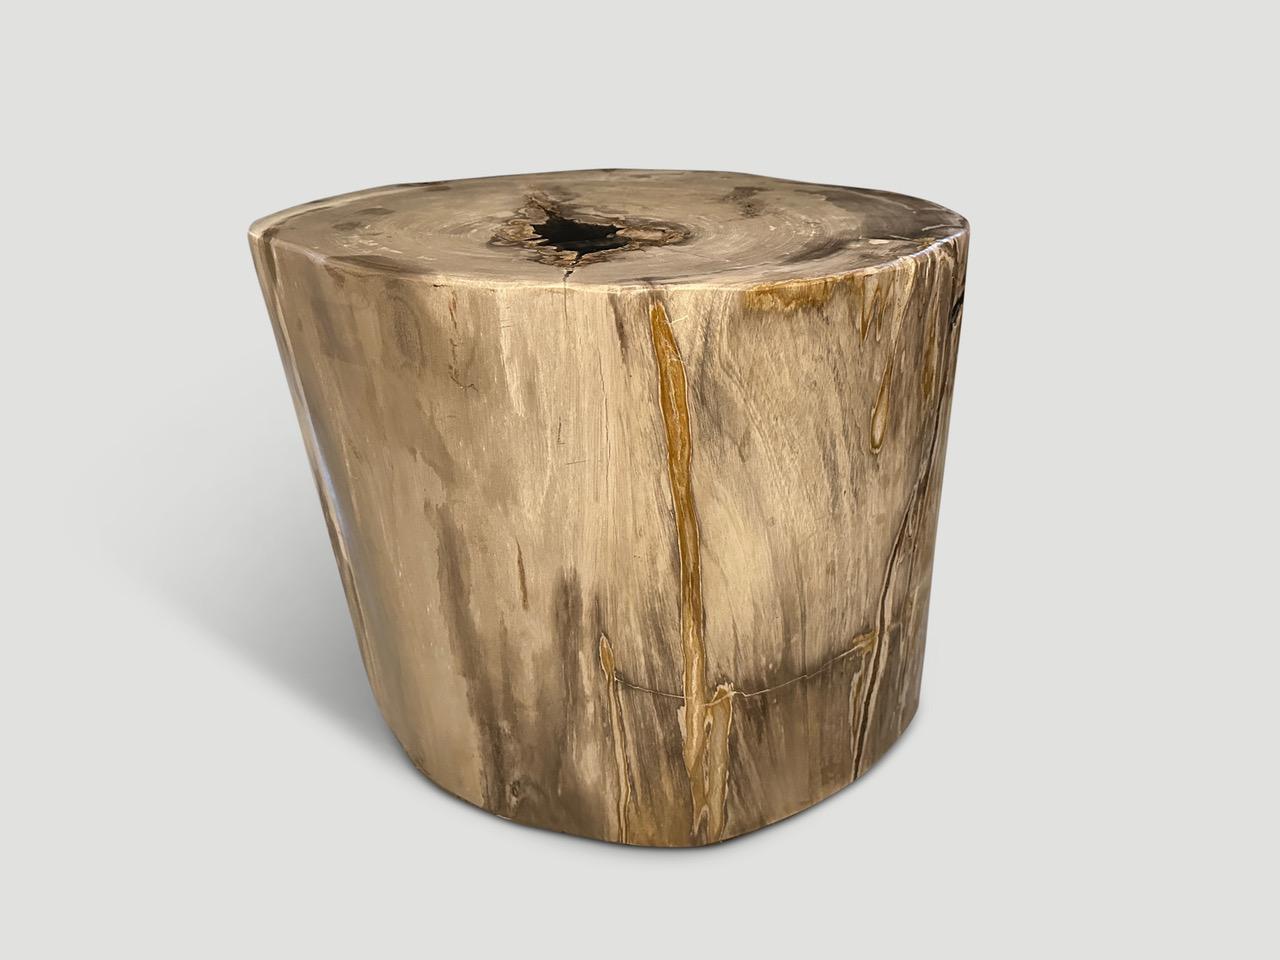 Impressive high quality petrified wood side table. It’s fascinating how Mother Nature produces these stunning 40 million year old petrified teak logs with such contrasting colors and natural patterns throughout. Modern yet with so much history.